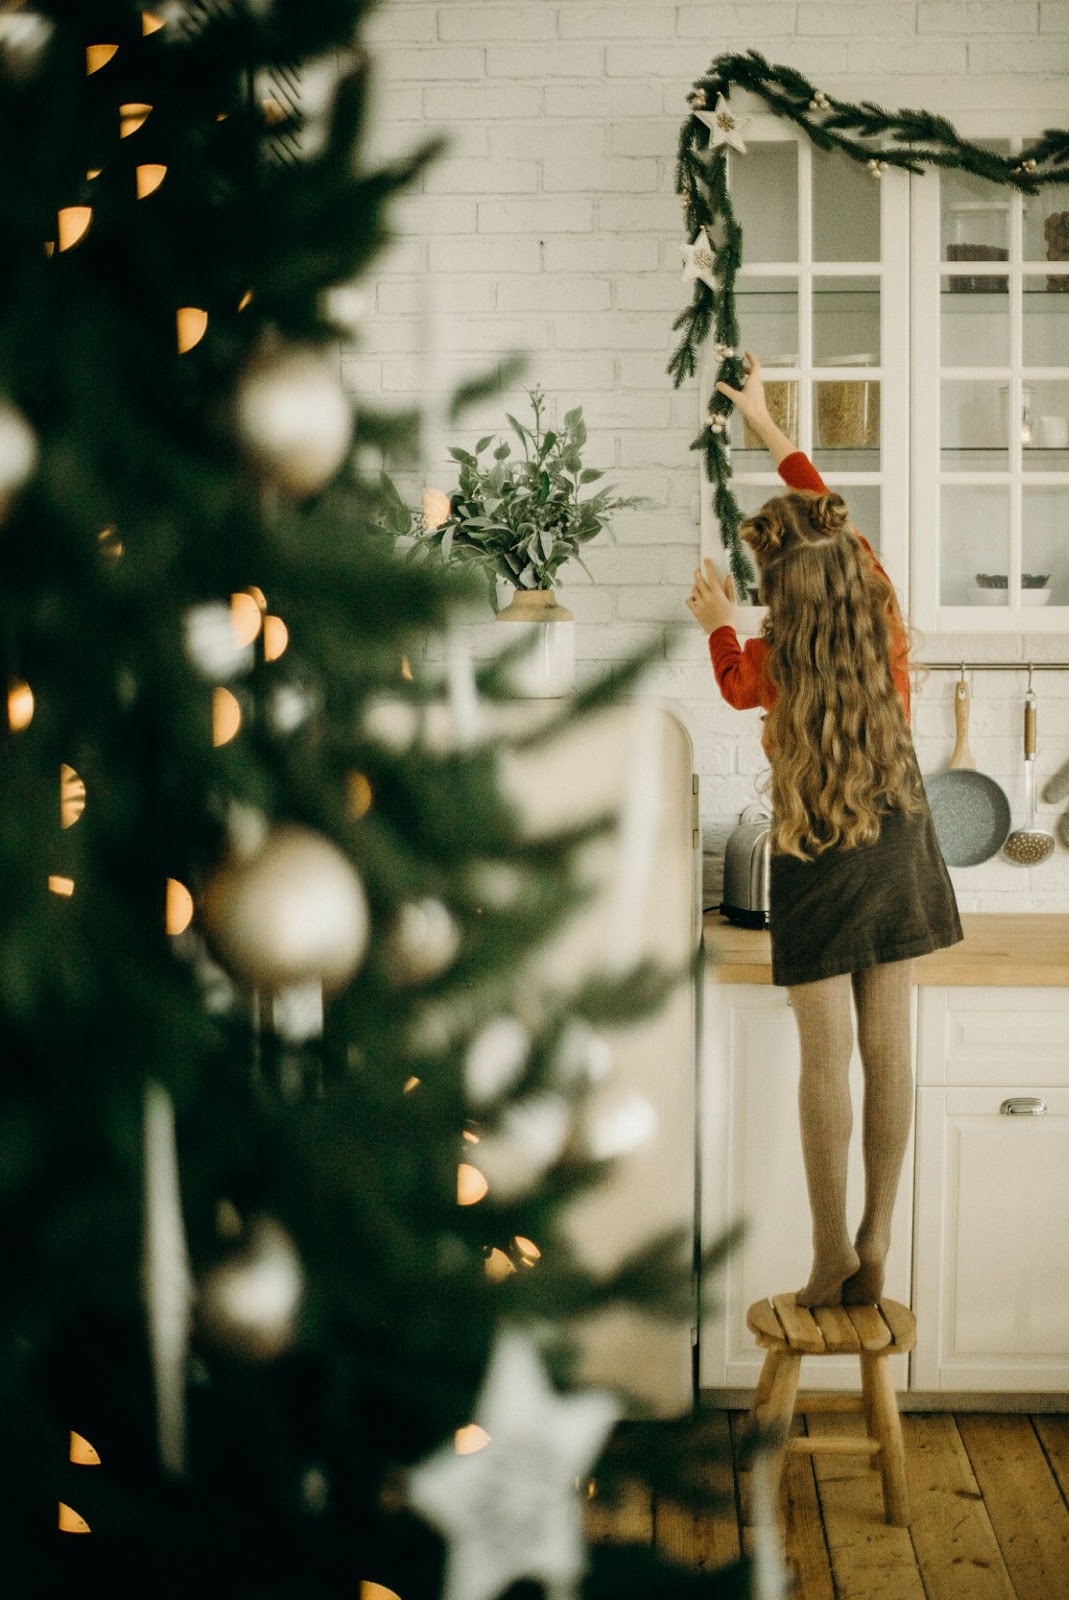 Young girl reaching for garland strung across kitchen cabinets.